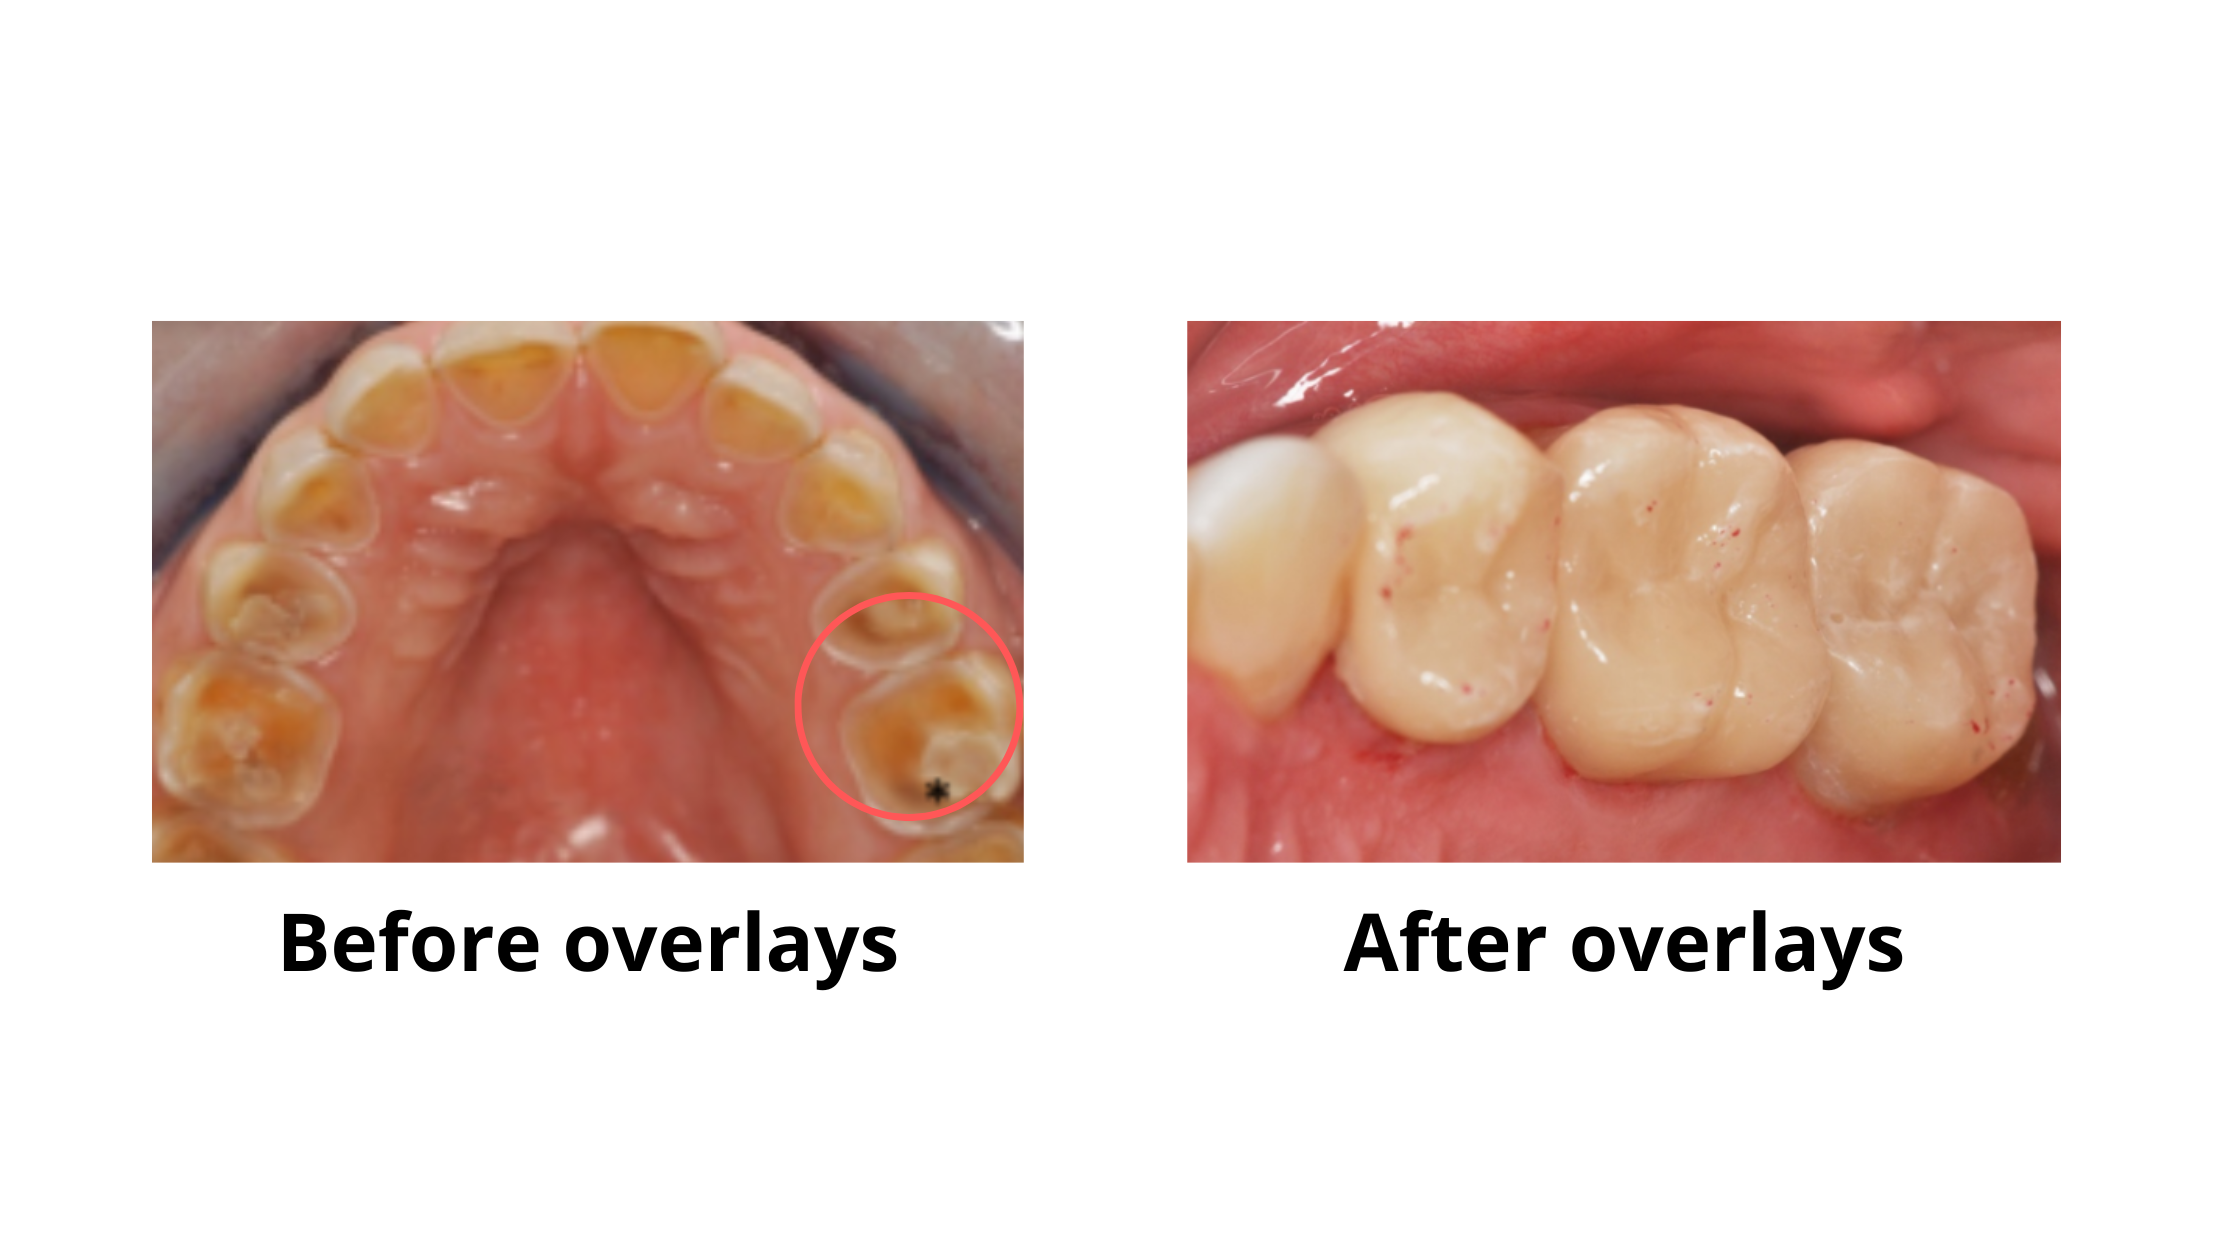 overlays for worn down back teeth: Restoring the chewing surfaces